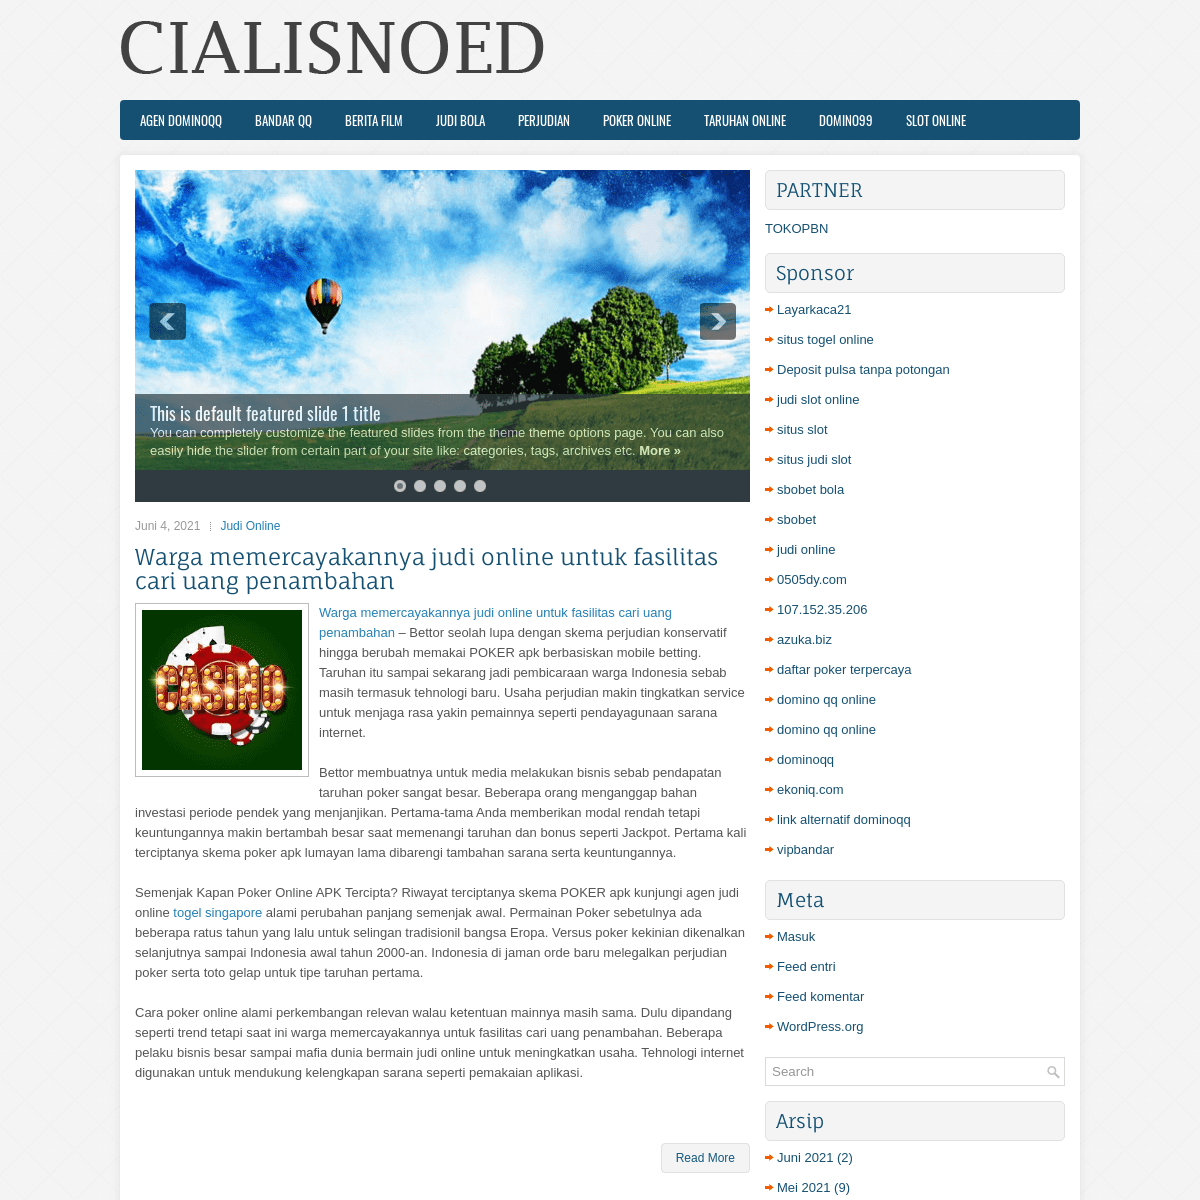 A complete backup of https://cialisnoed.com